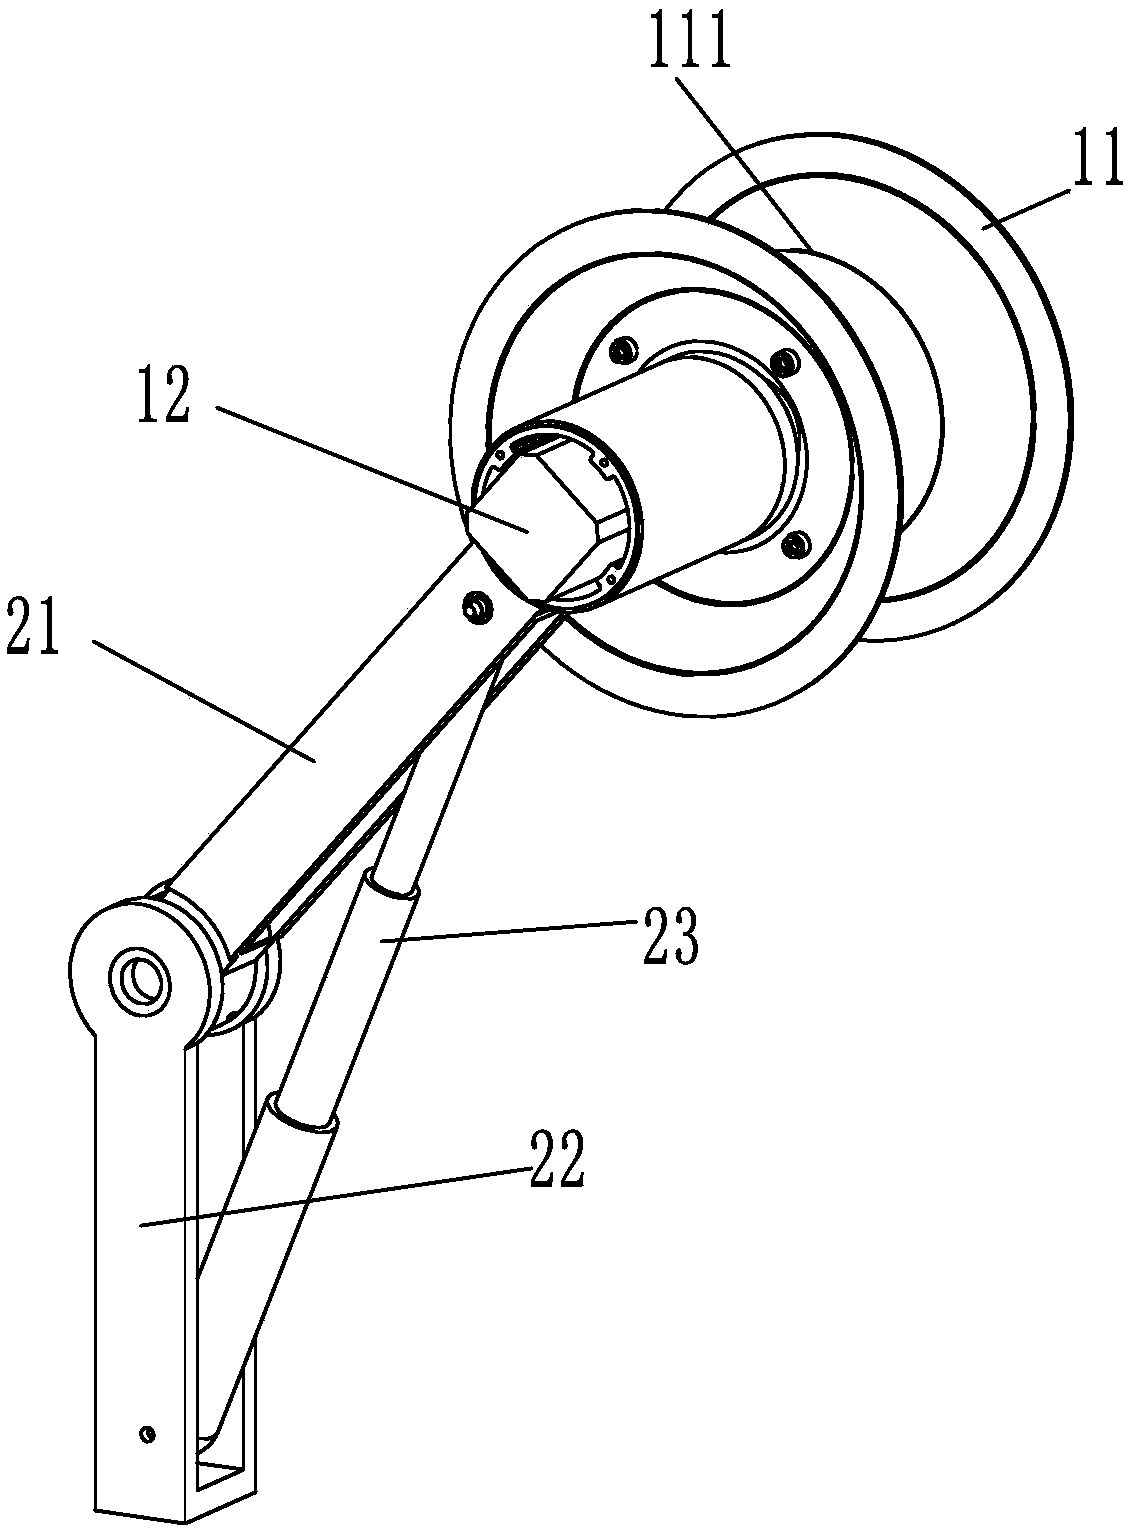 Sea horse type vibration damper assembling and disassembling device and method